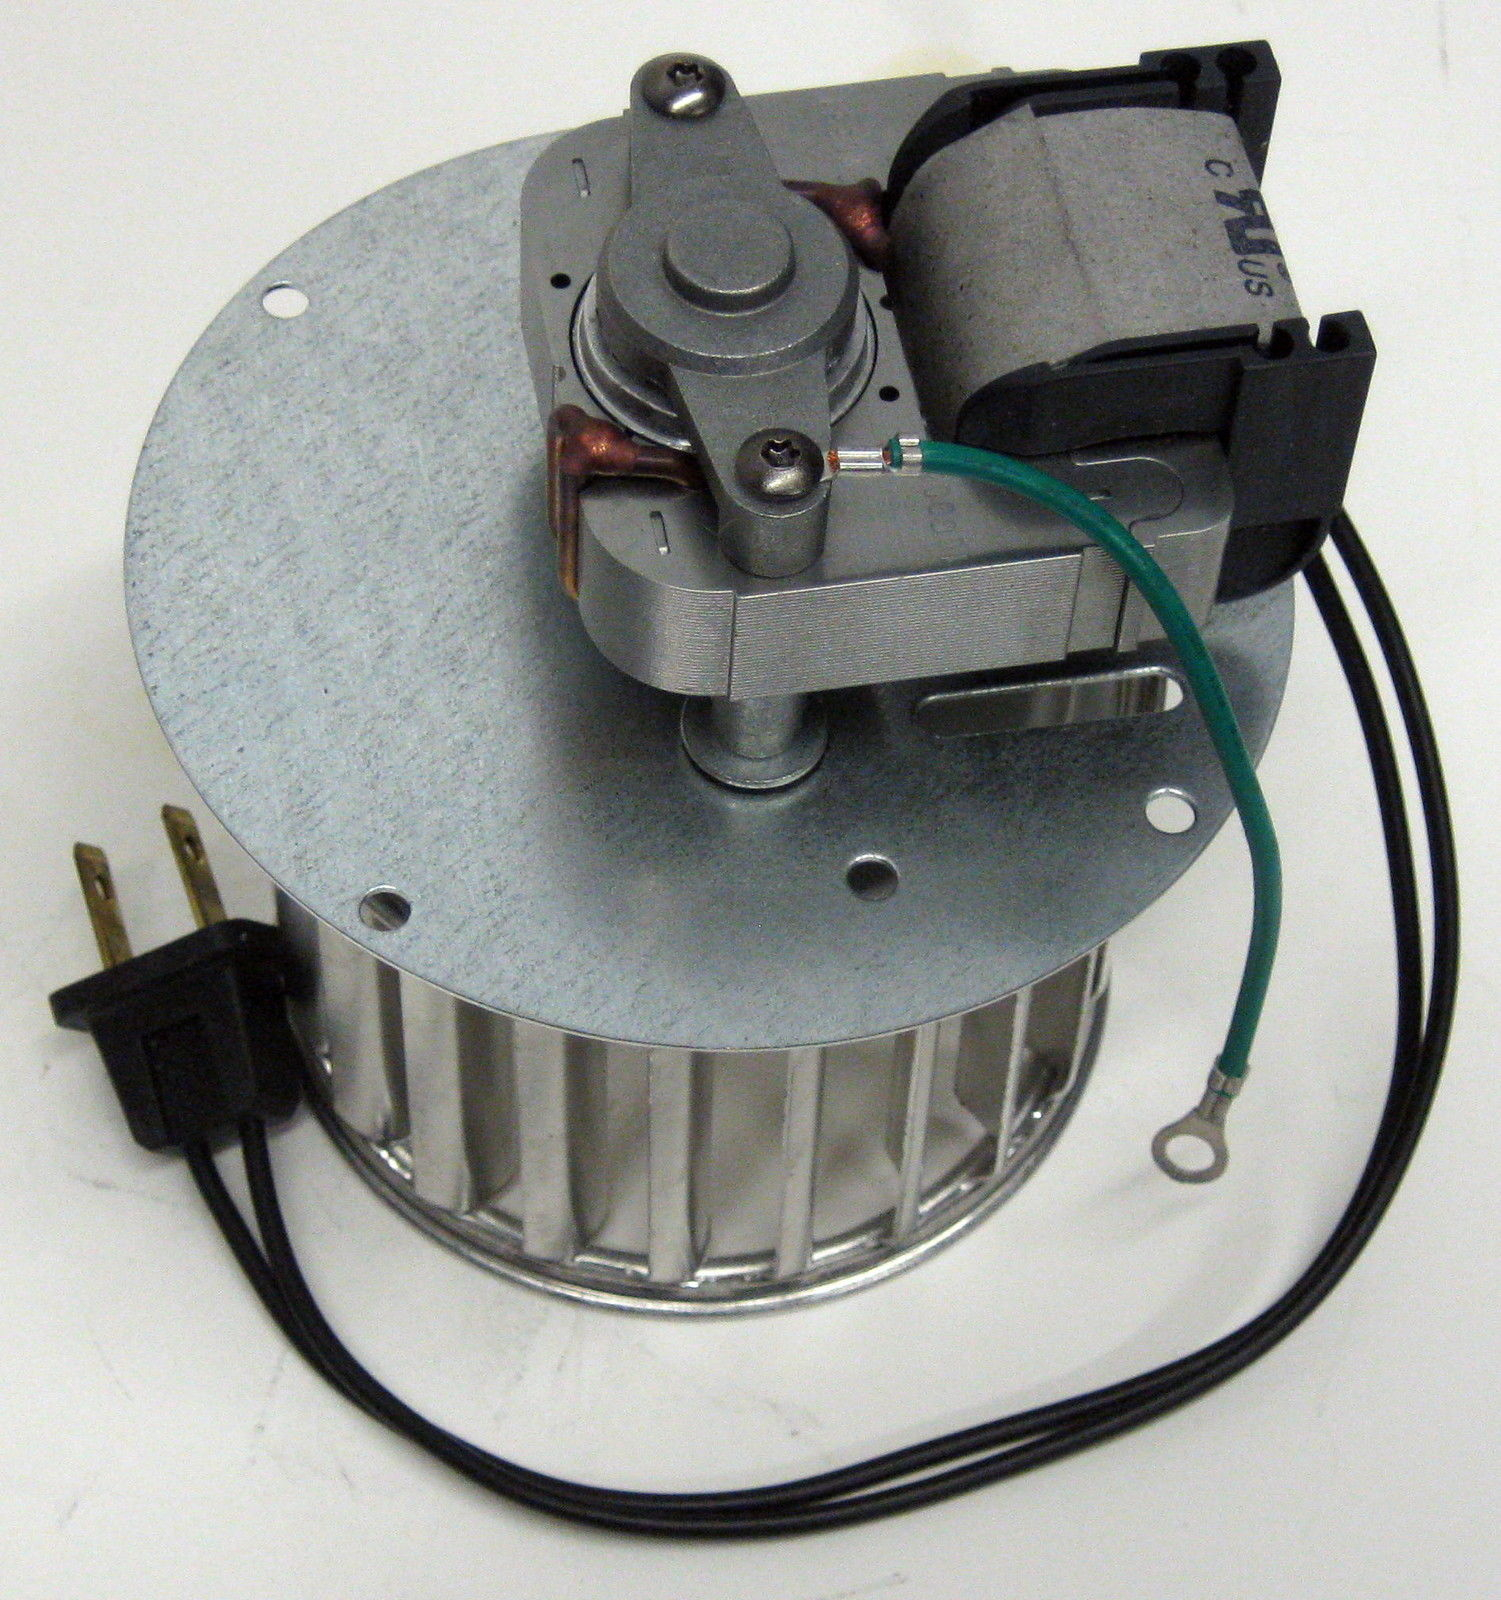 Broan Bathroom Fan Motor Replacement Instructions Image Of intended for size 1501 X 1600